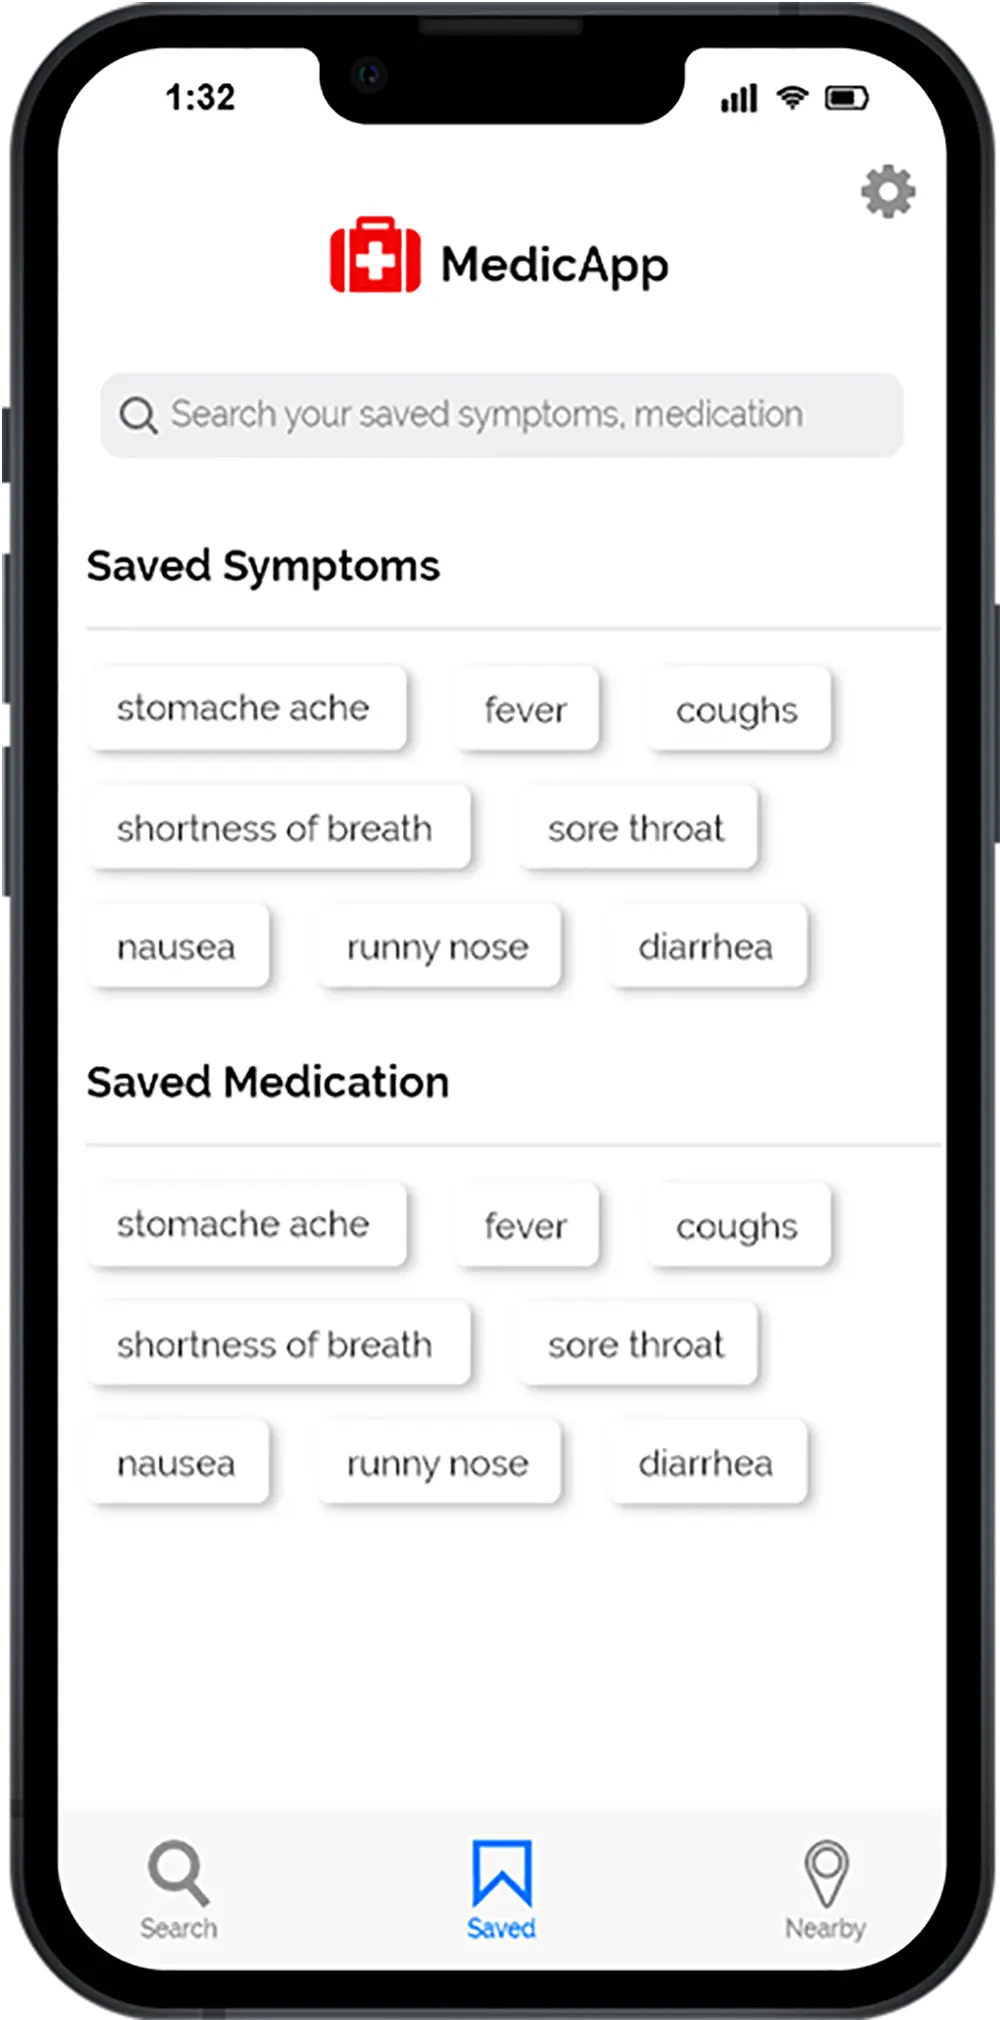 MedicApp saved page with saved symptoms and medication